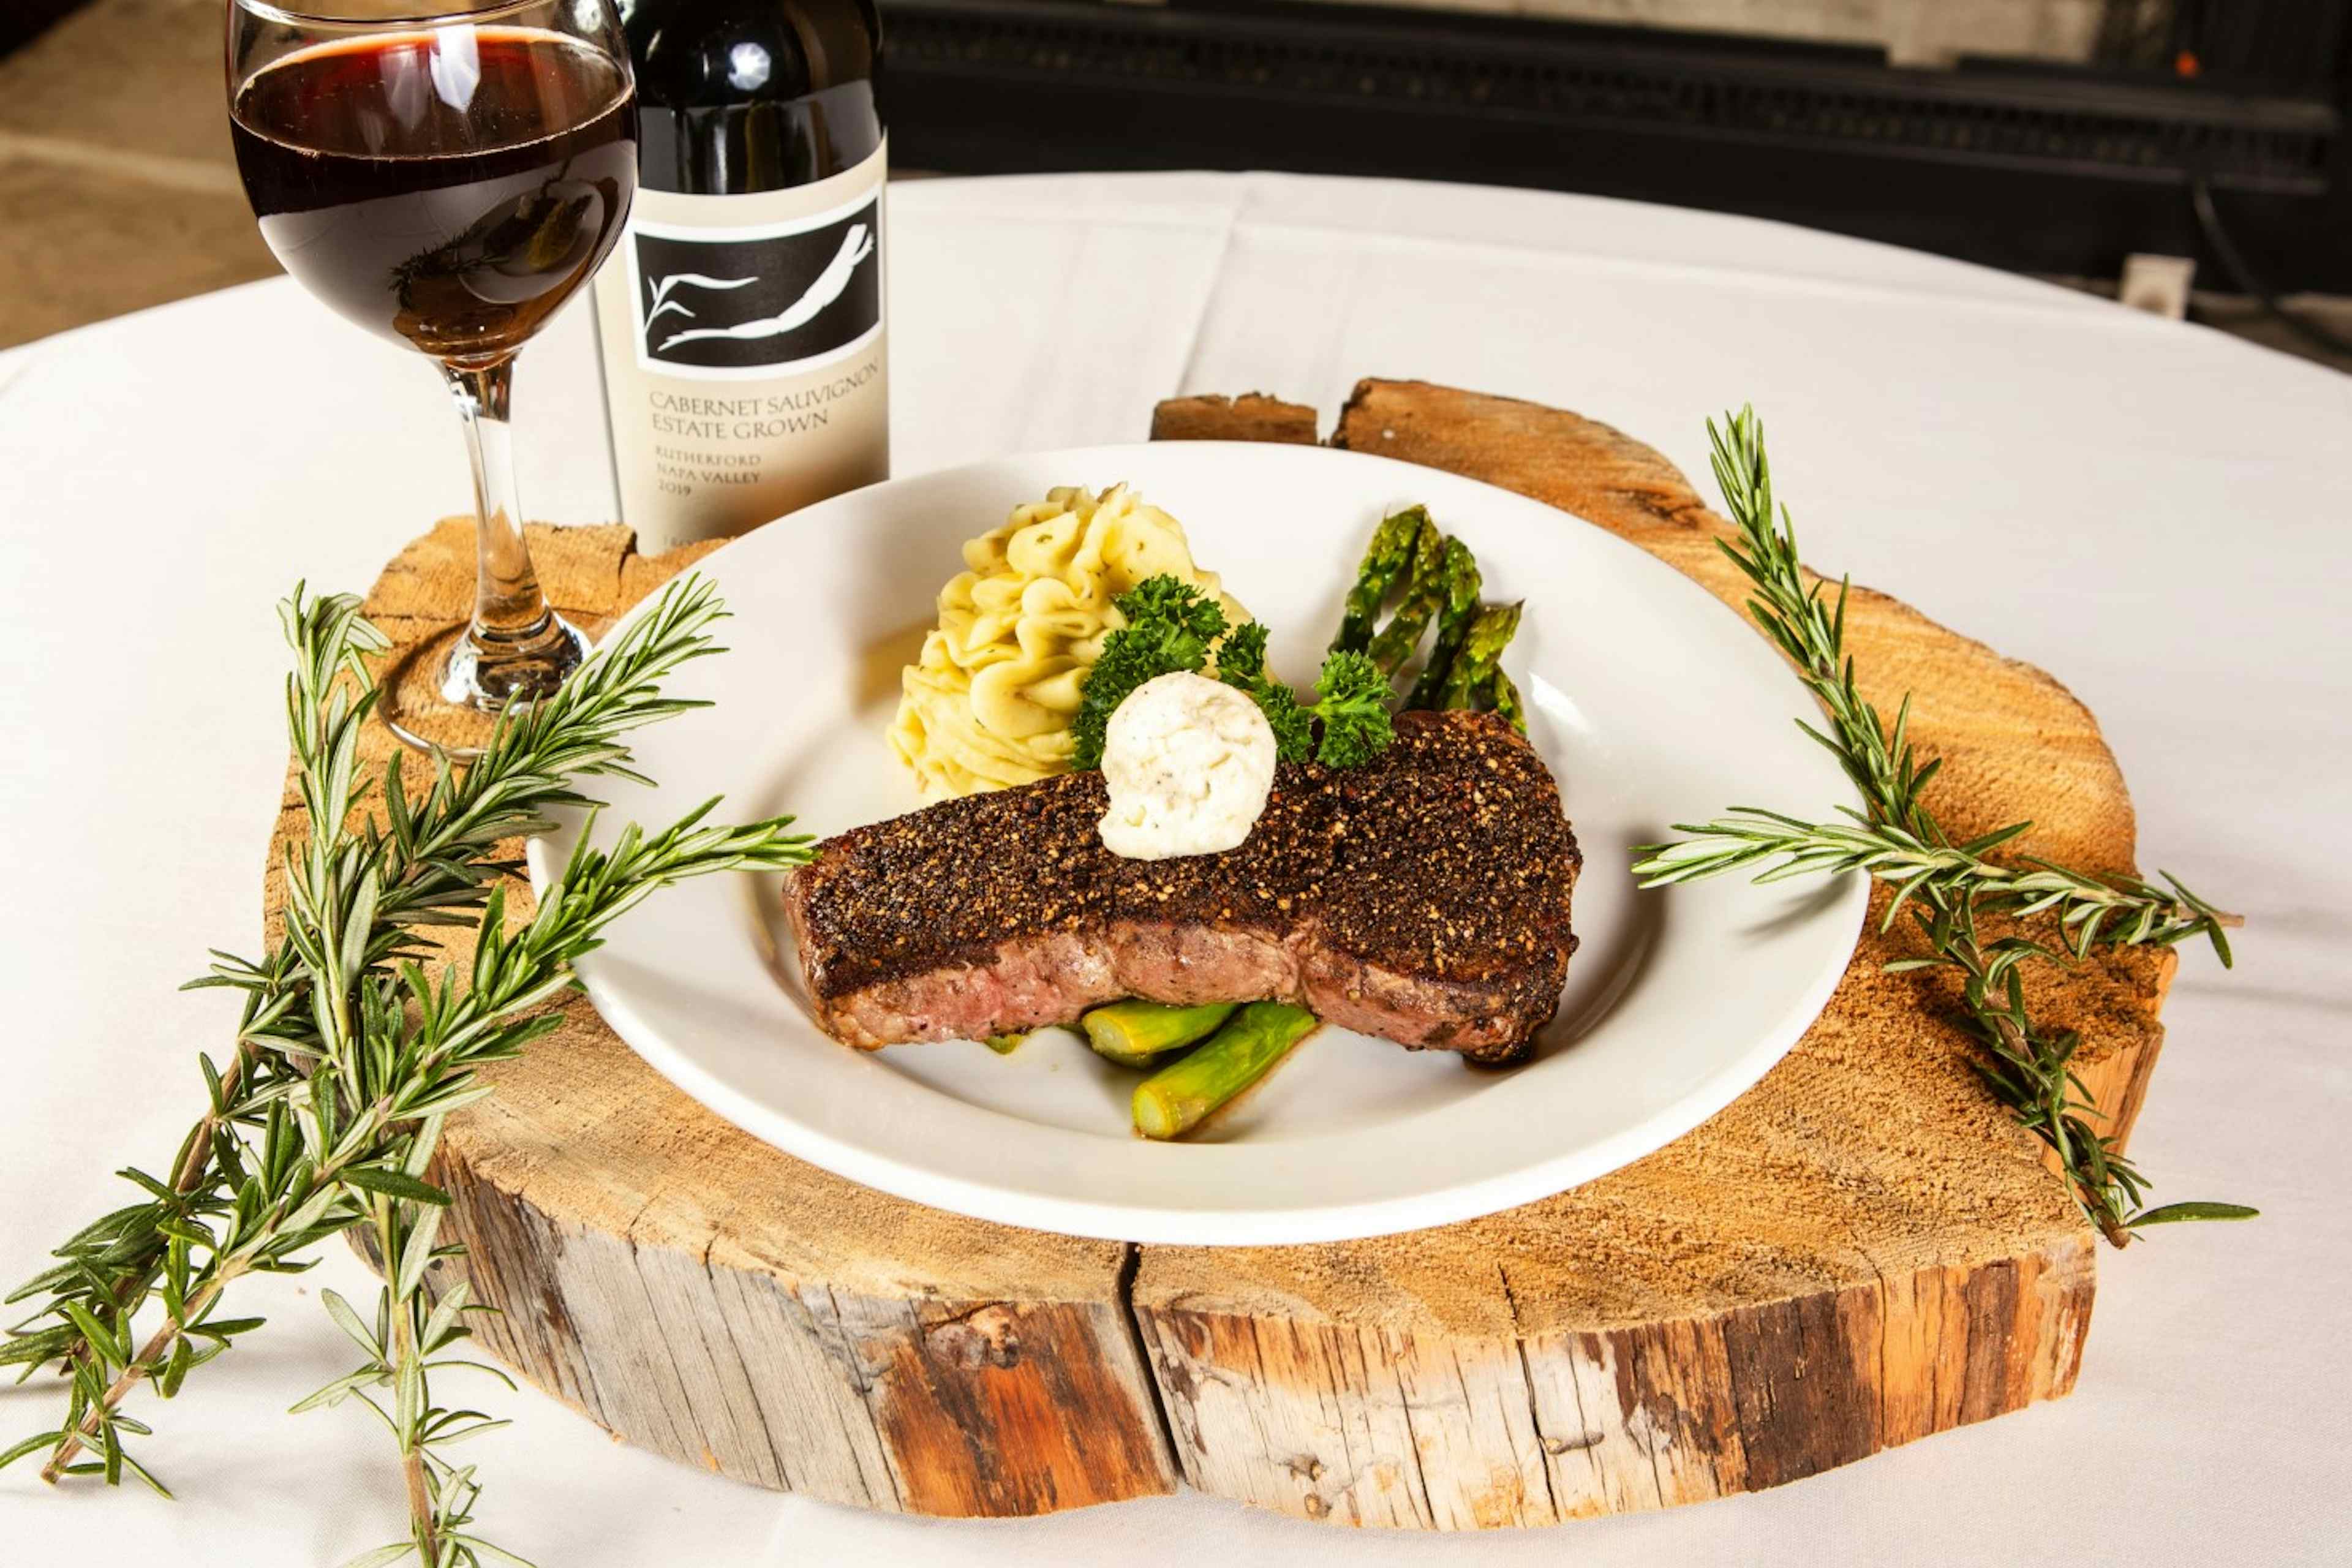 Steak with mashed potatoes and asparagus, served with a glass of red wine, offered at the Flying Saddle Steakhouse.